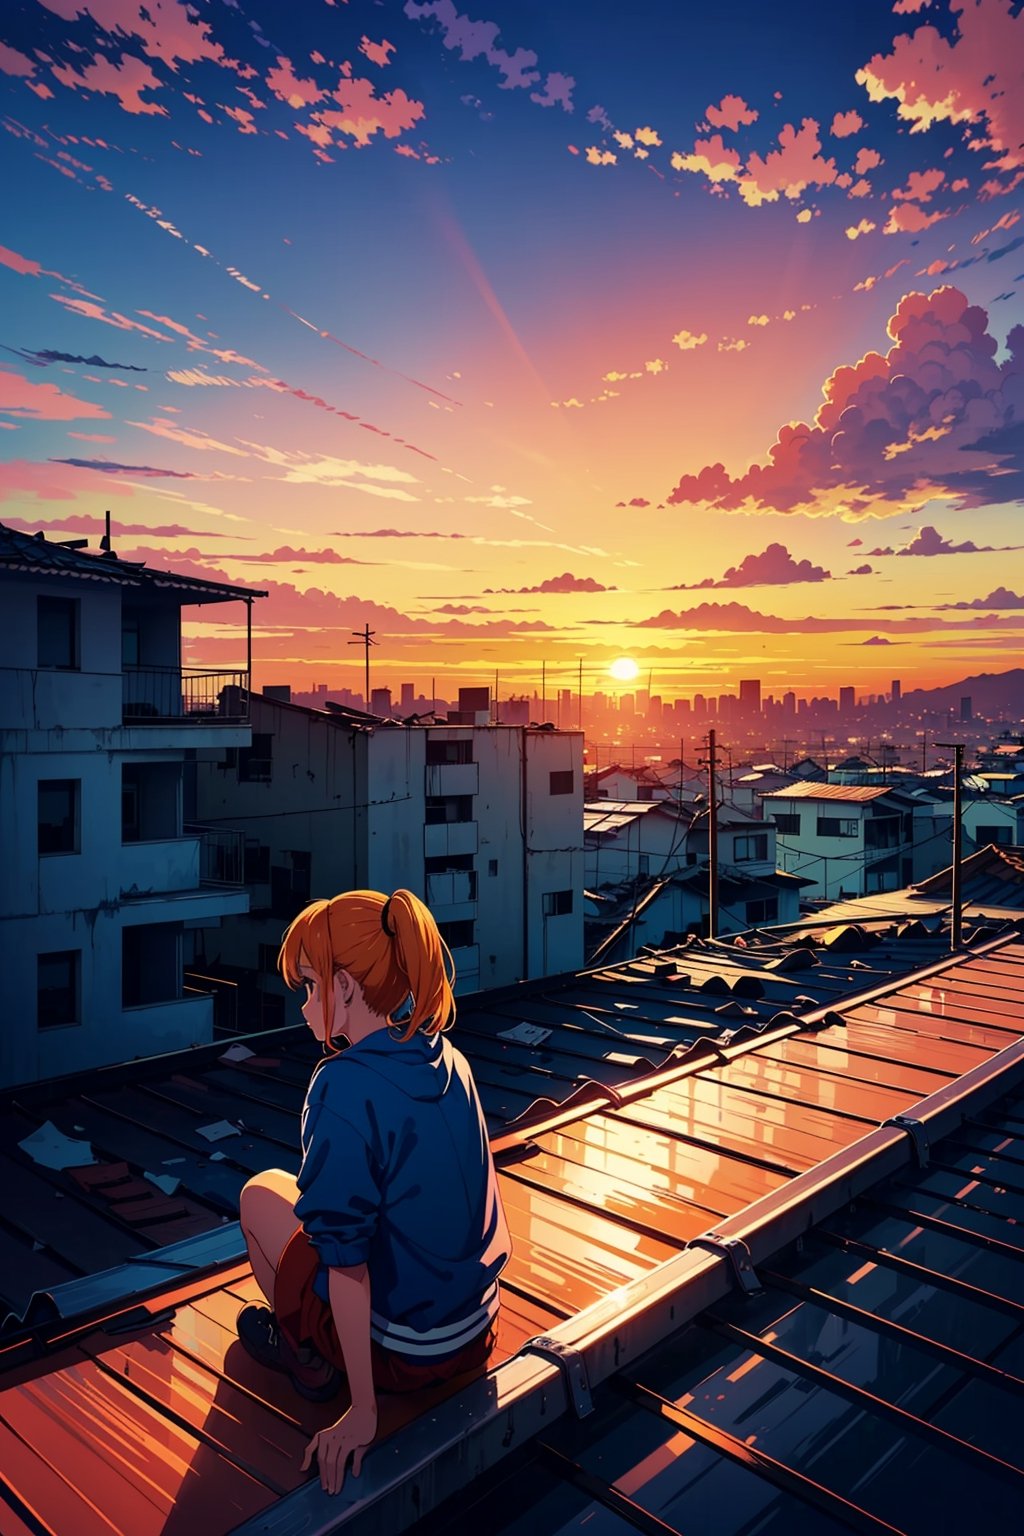 lone young girl sitting on the roof of a broke down house, in the favelas, clothings in bad conditions, sunset, orange sky, beautiful scenery, hopeful